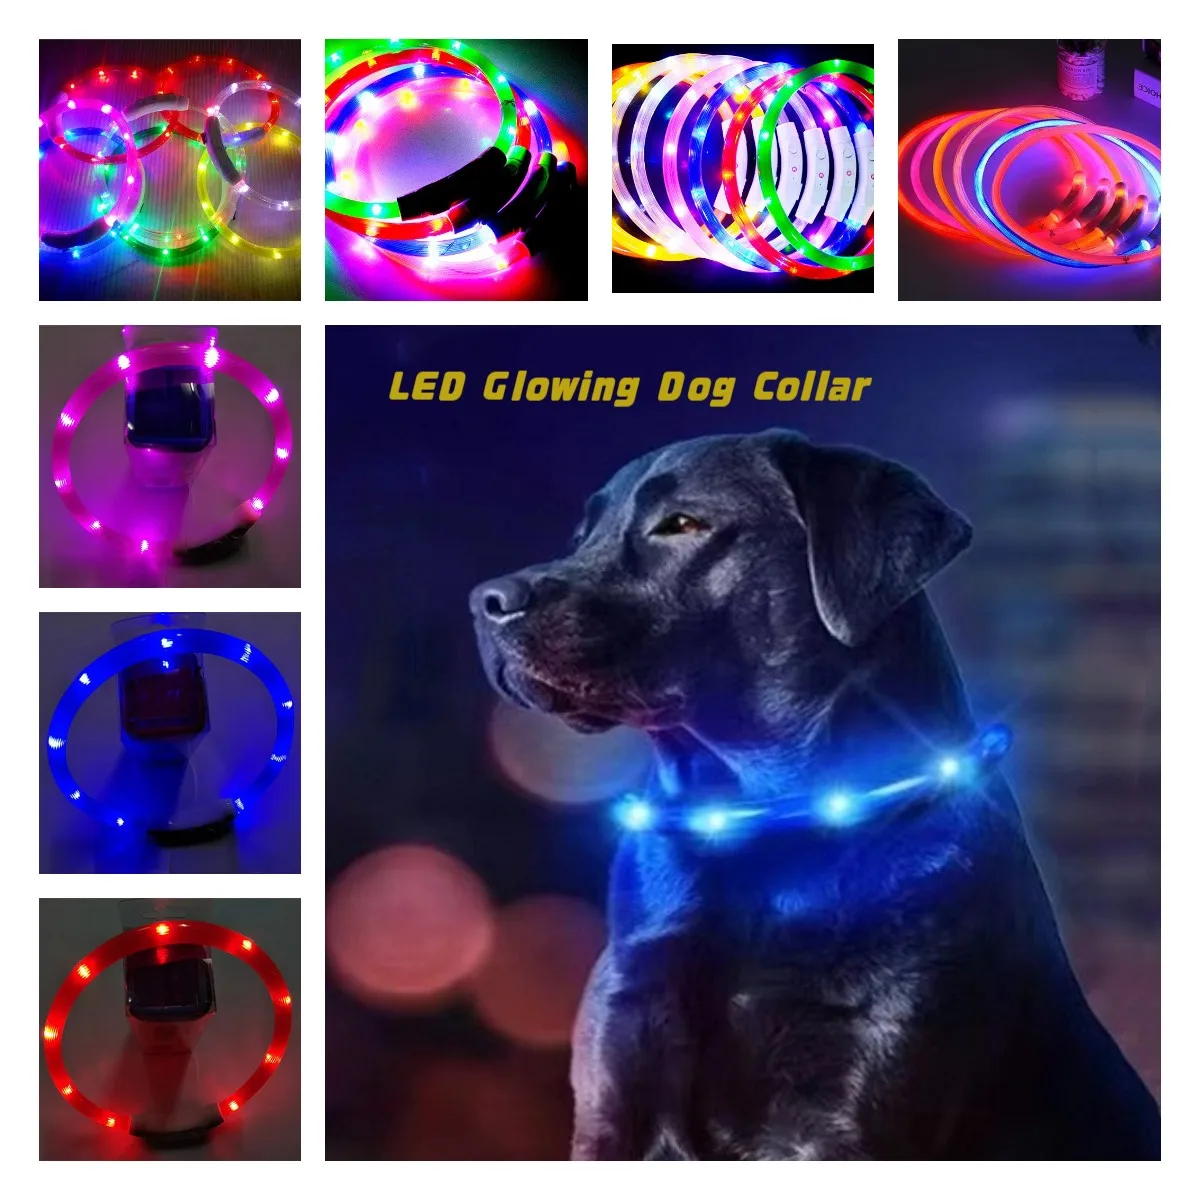 

LED Glowing Dog Collar Flashing Rechargea Luminous Collar Night Anti-Lost Dog Light HarnessFor Puppy Pet Products